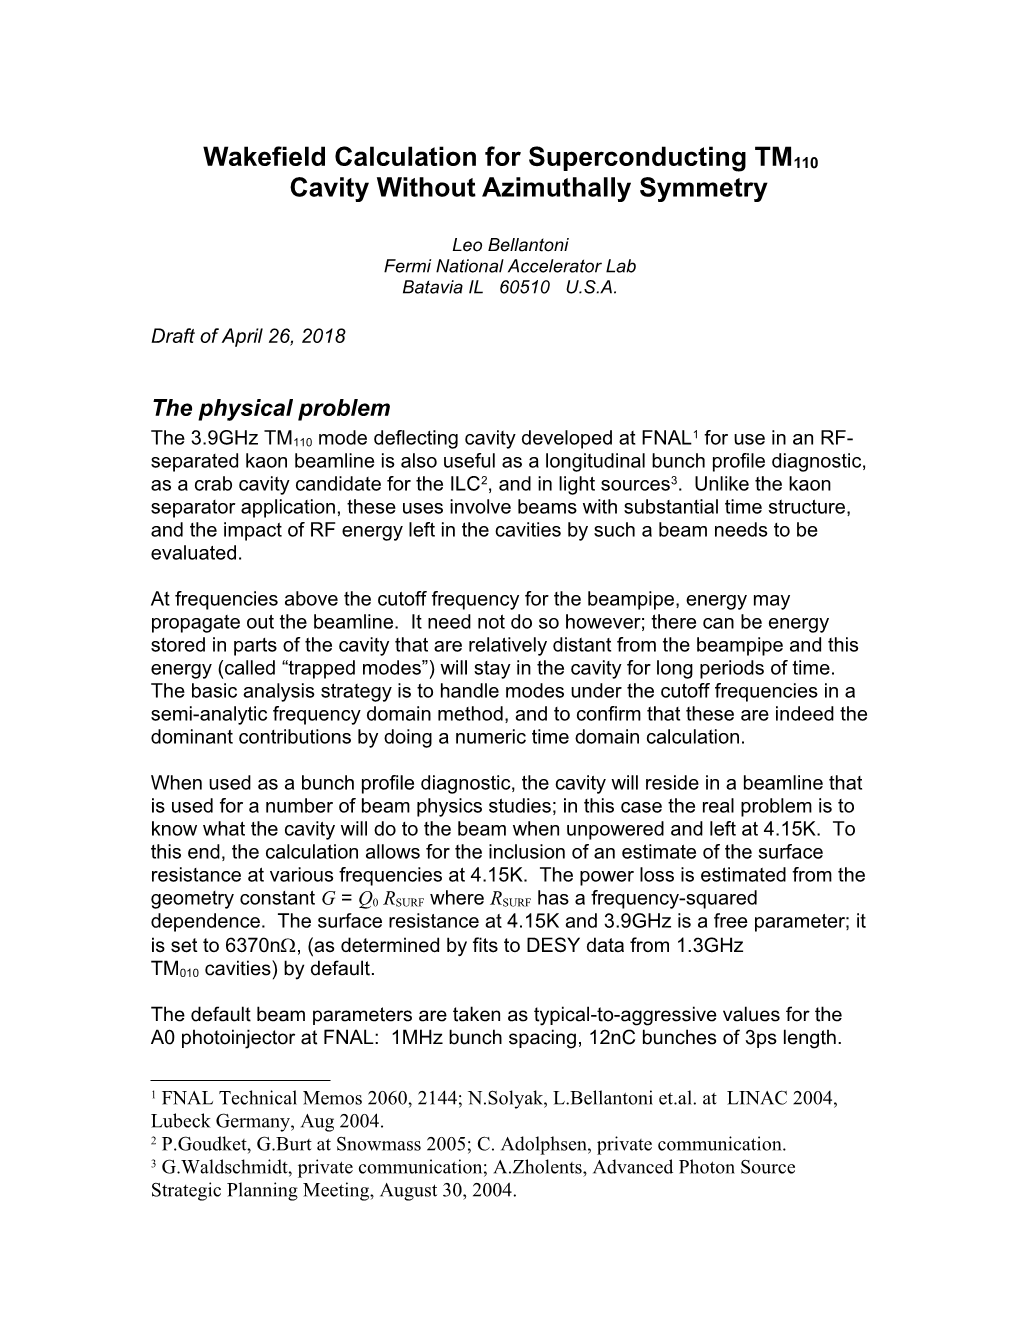 Wakefield Calculation for Superconducting Tm110cavity Without Azimuthally Symmetry